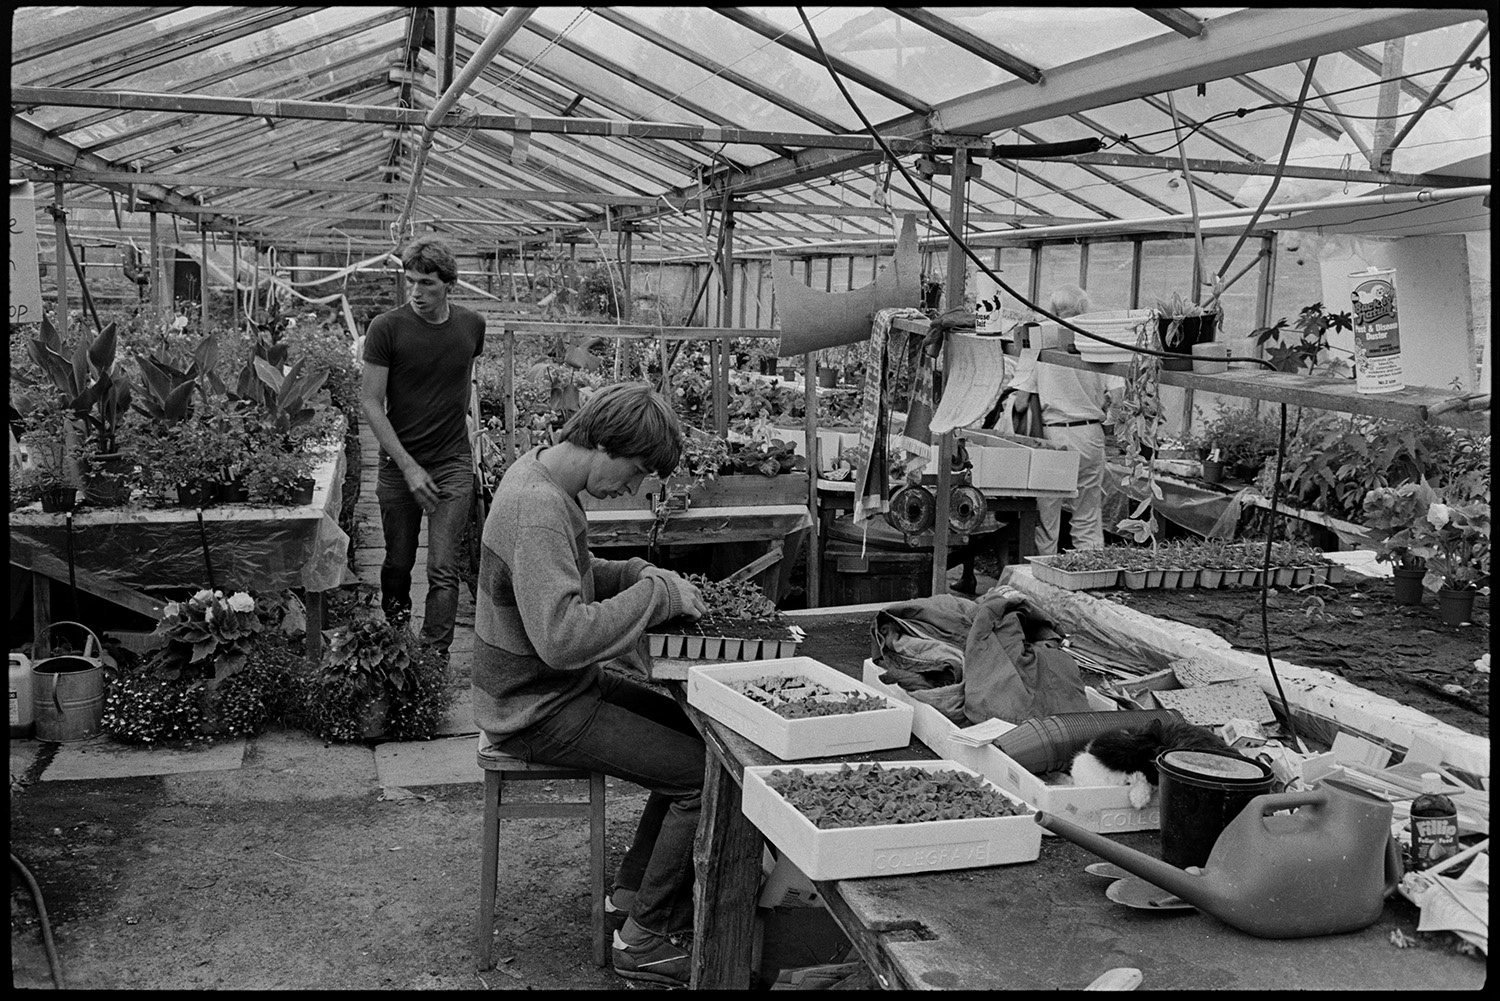 Man working in garden centre, potting plants in greenhouse.
[Men working in a greenhouse, potting plants, at the Eggesford Garden Centre. Benches with plants, plant boxes and irrigation system are visible in the greenhouse.]